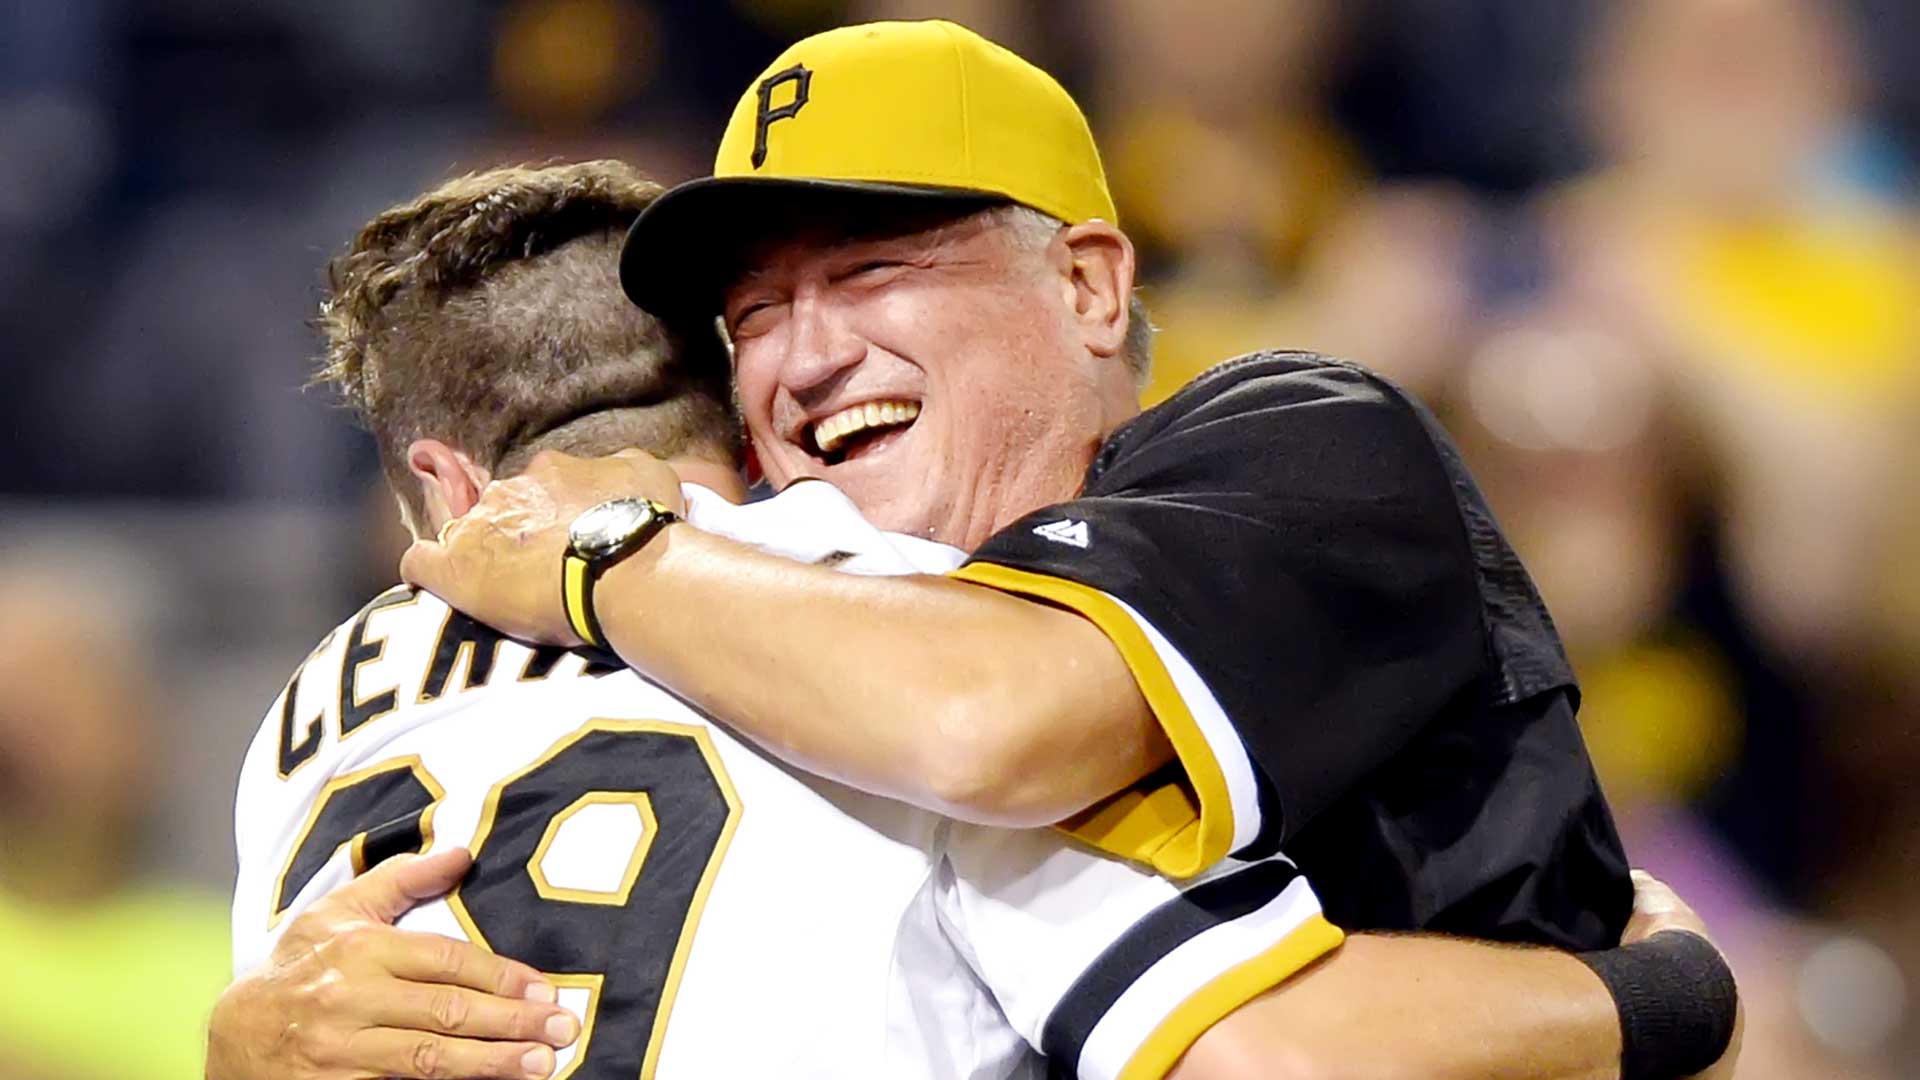 Clint Hurdle is 63 years old.